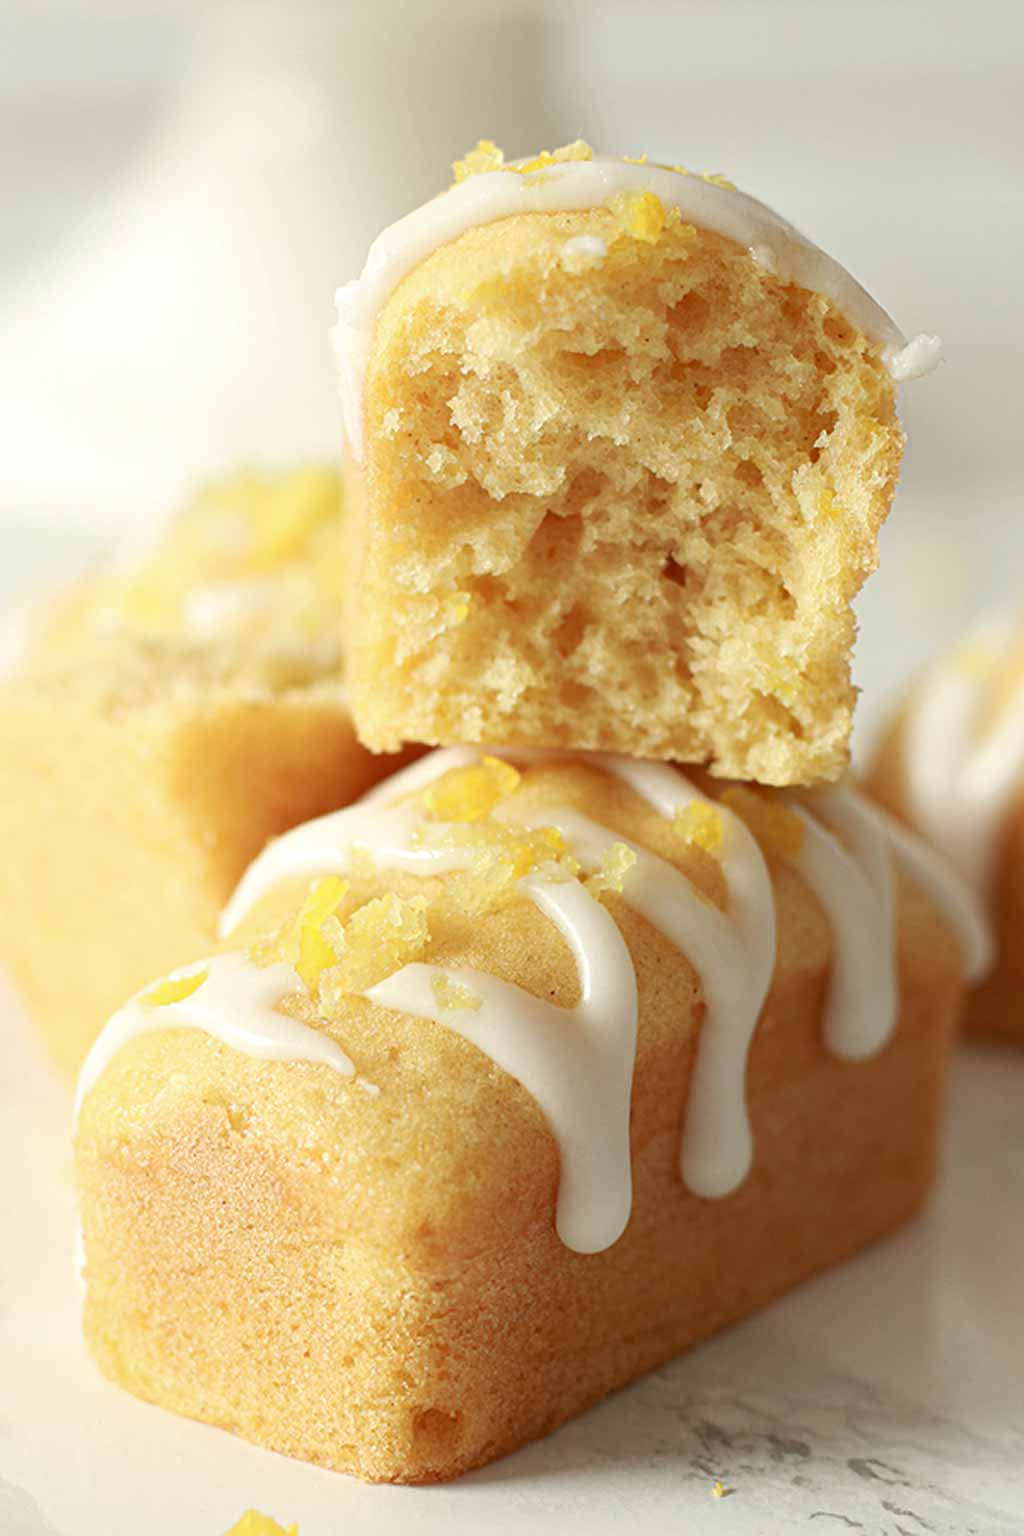 One Mini Lemon Loaf Cake With Another Half Of One On Top